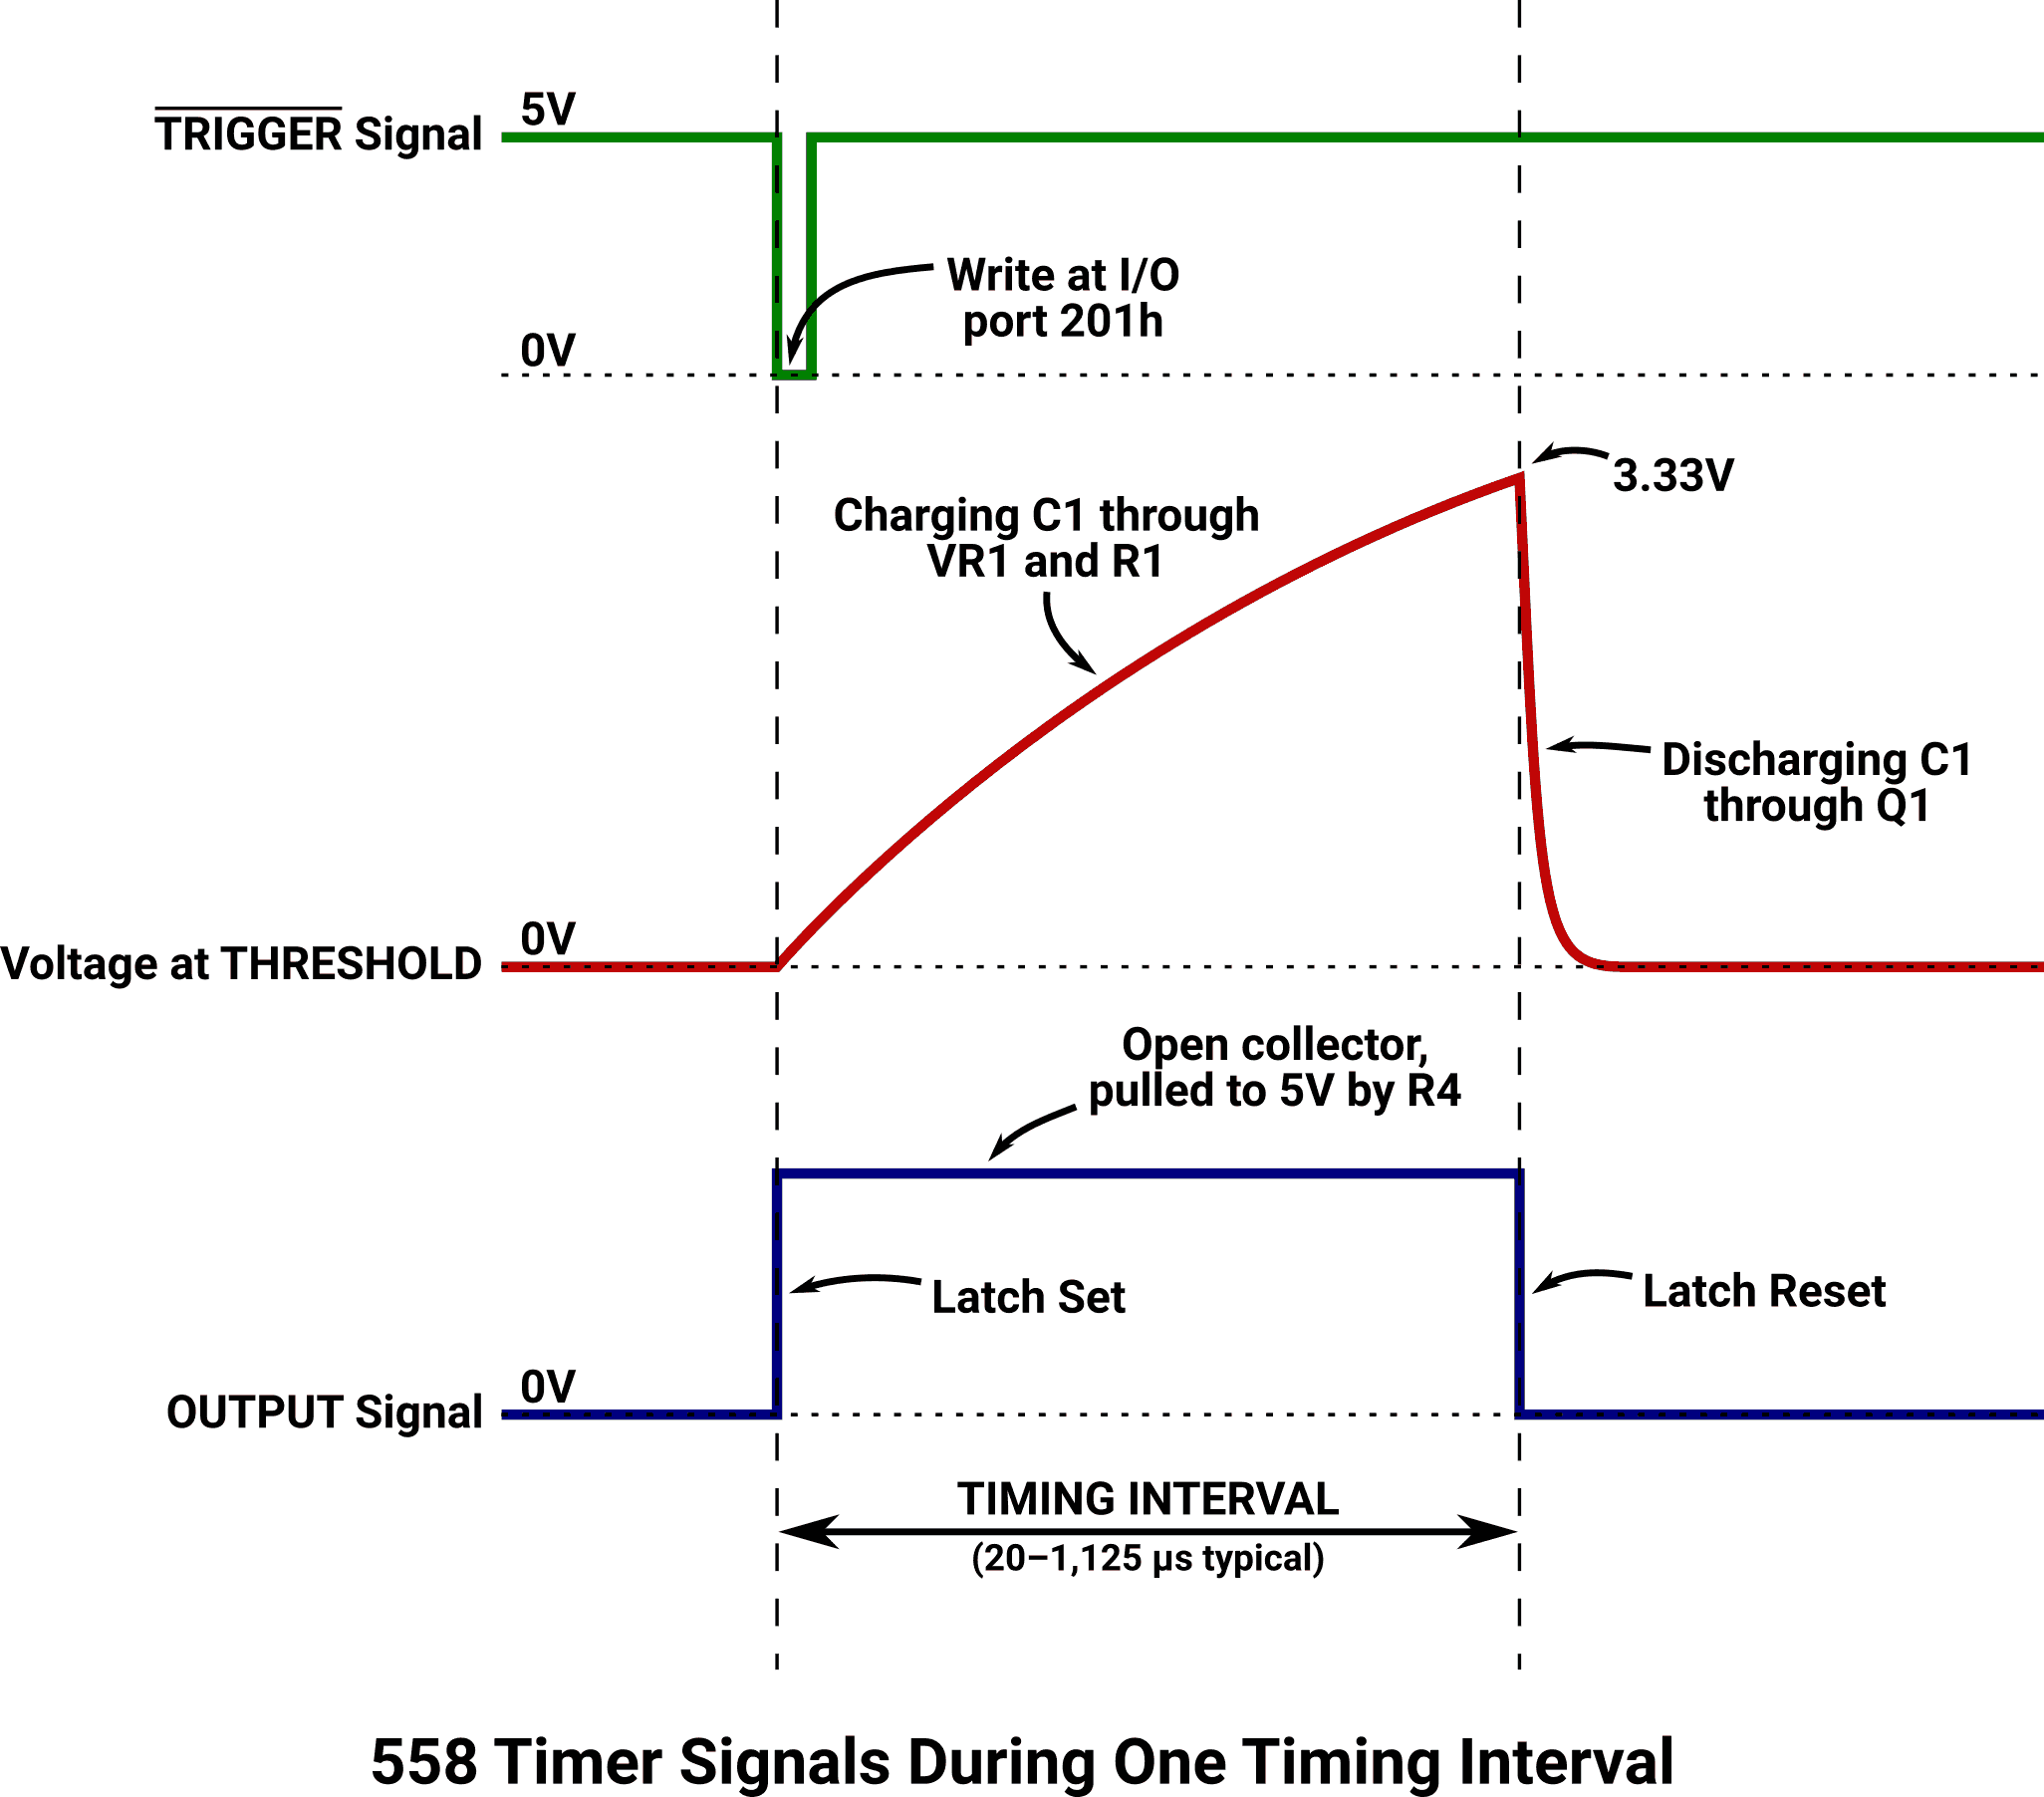 558 timer signals during one timing interval.